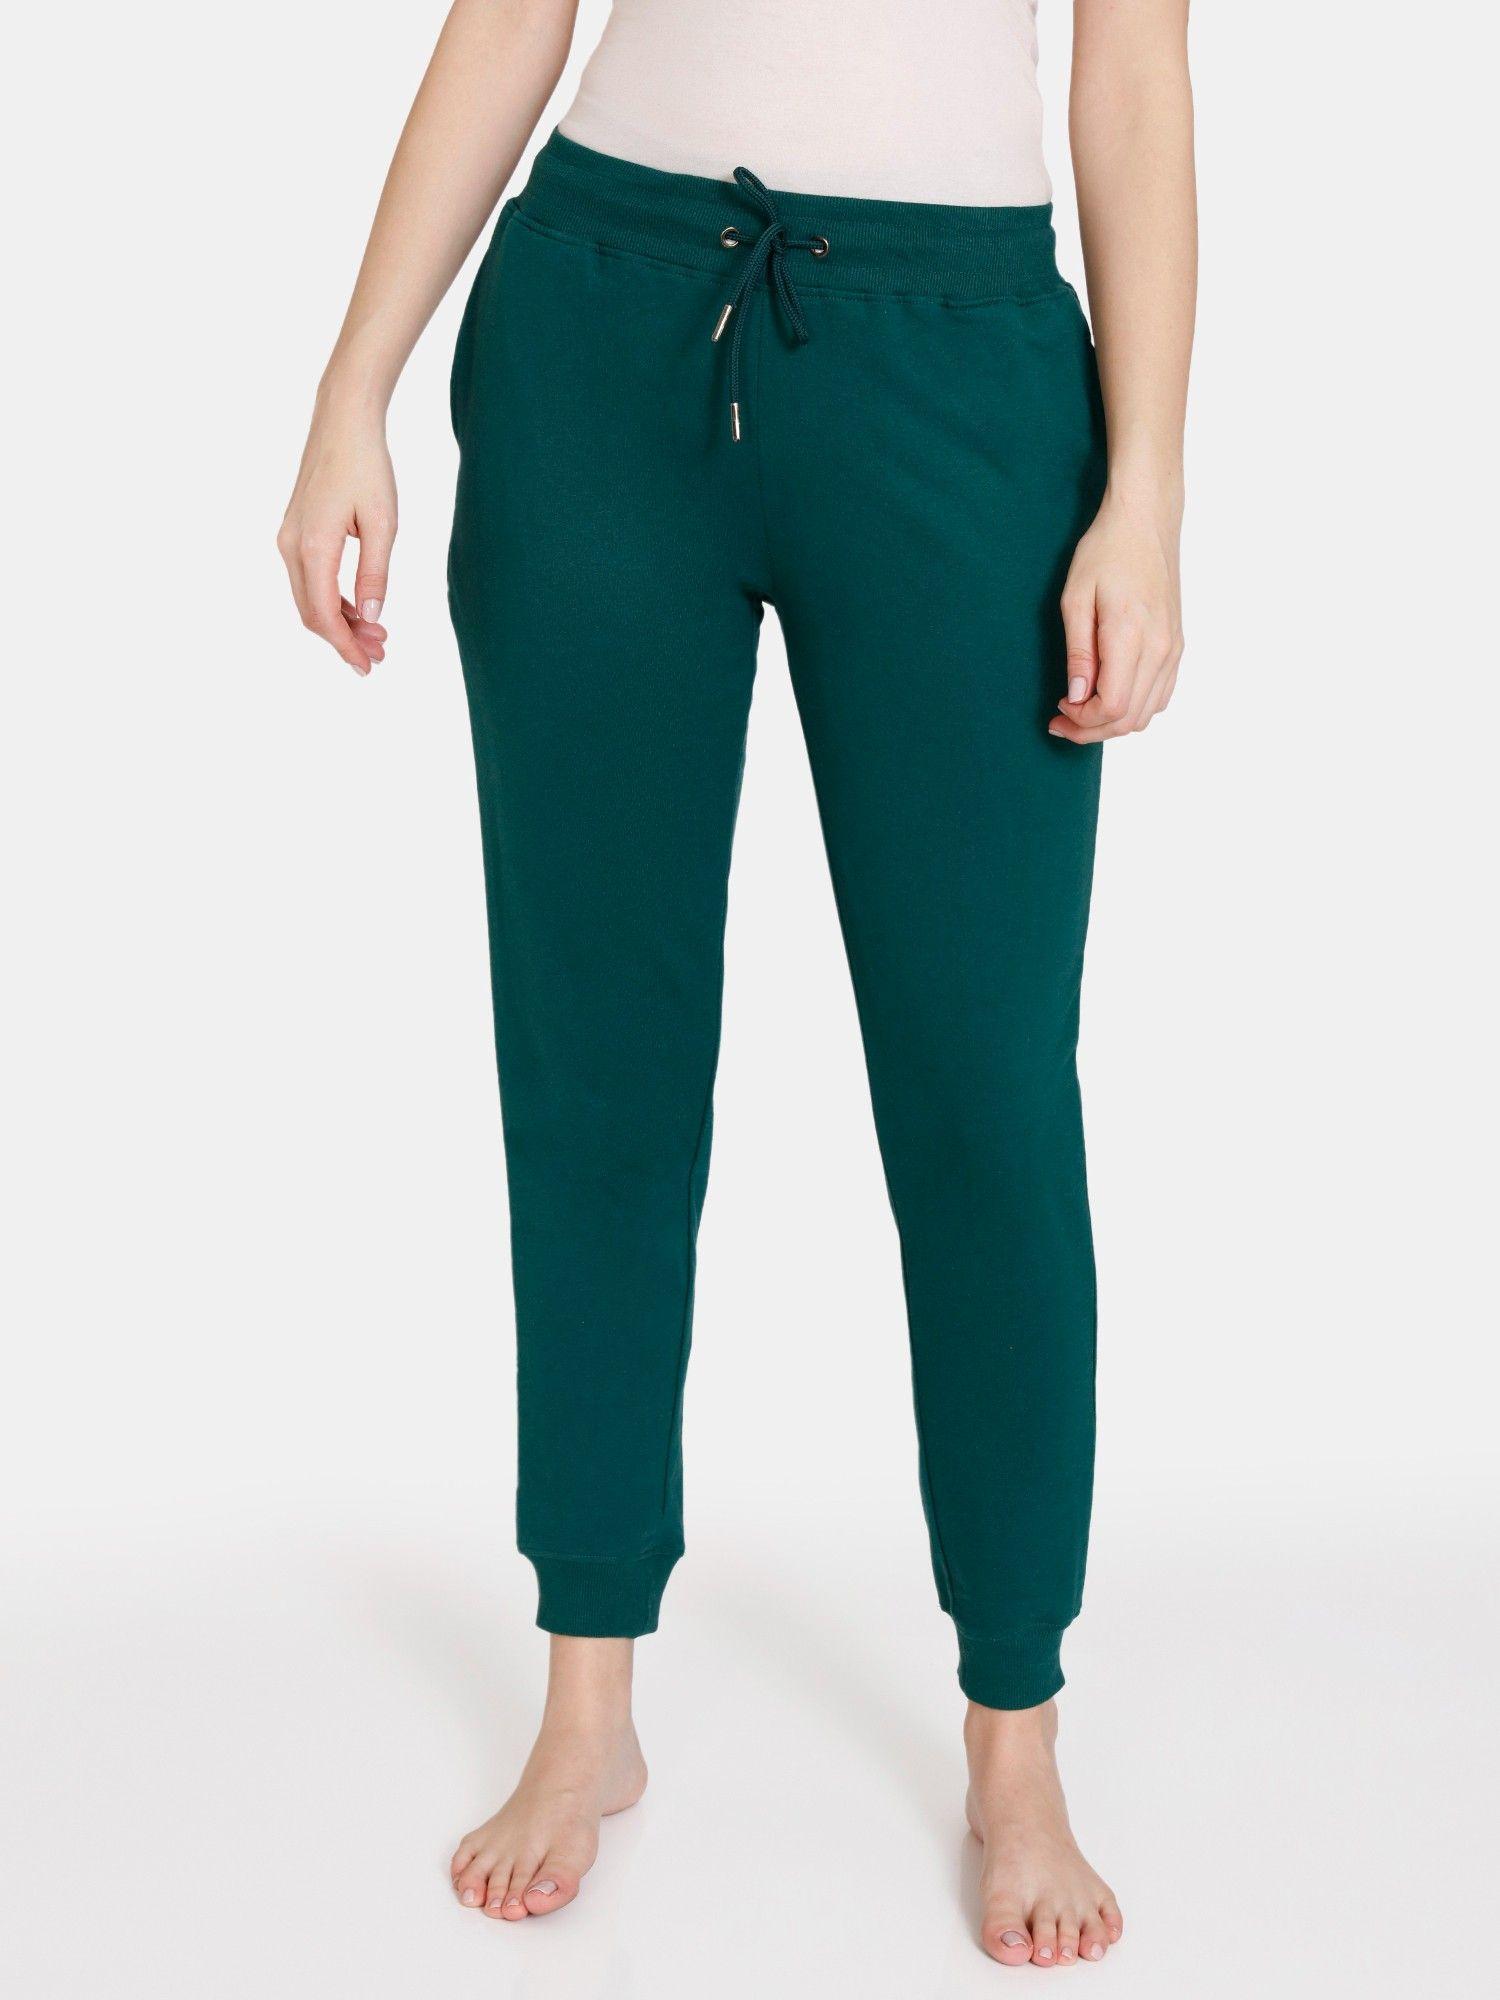 winter-refresh-terry-fabric-knit-cotton-lounge-pant---rain-forest-green